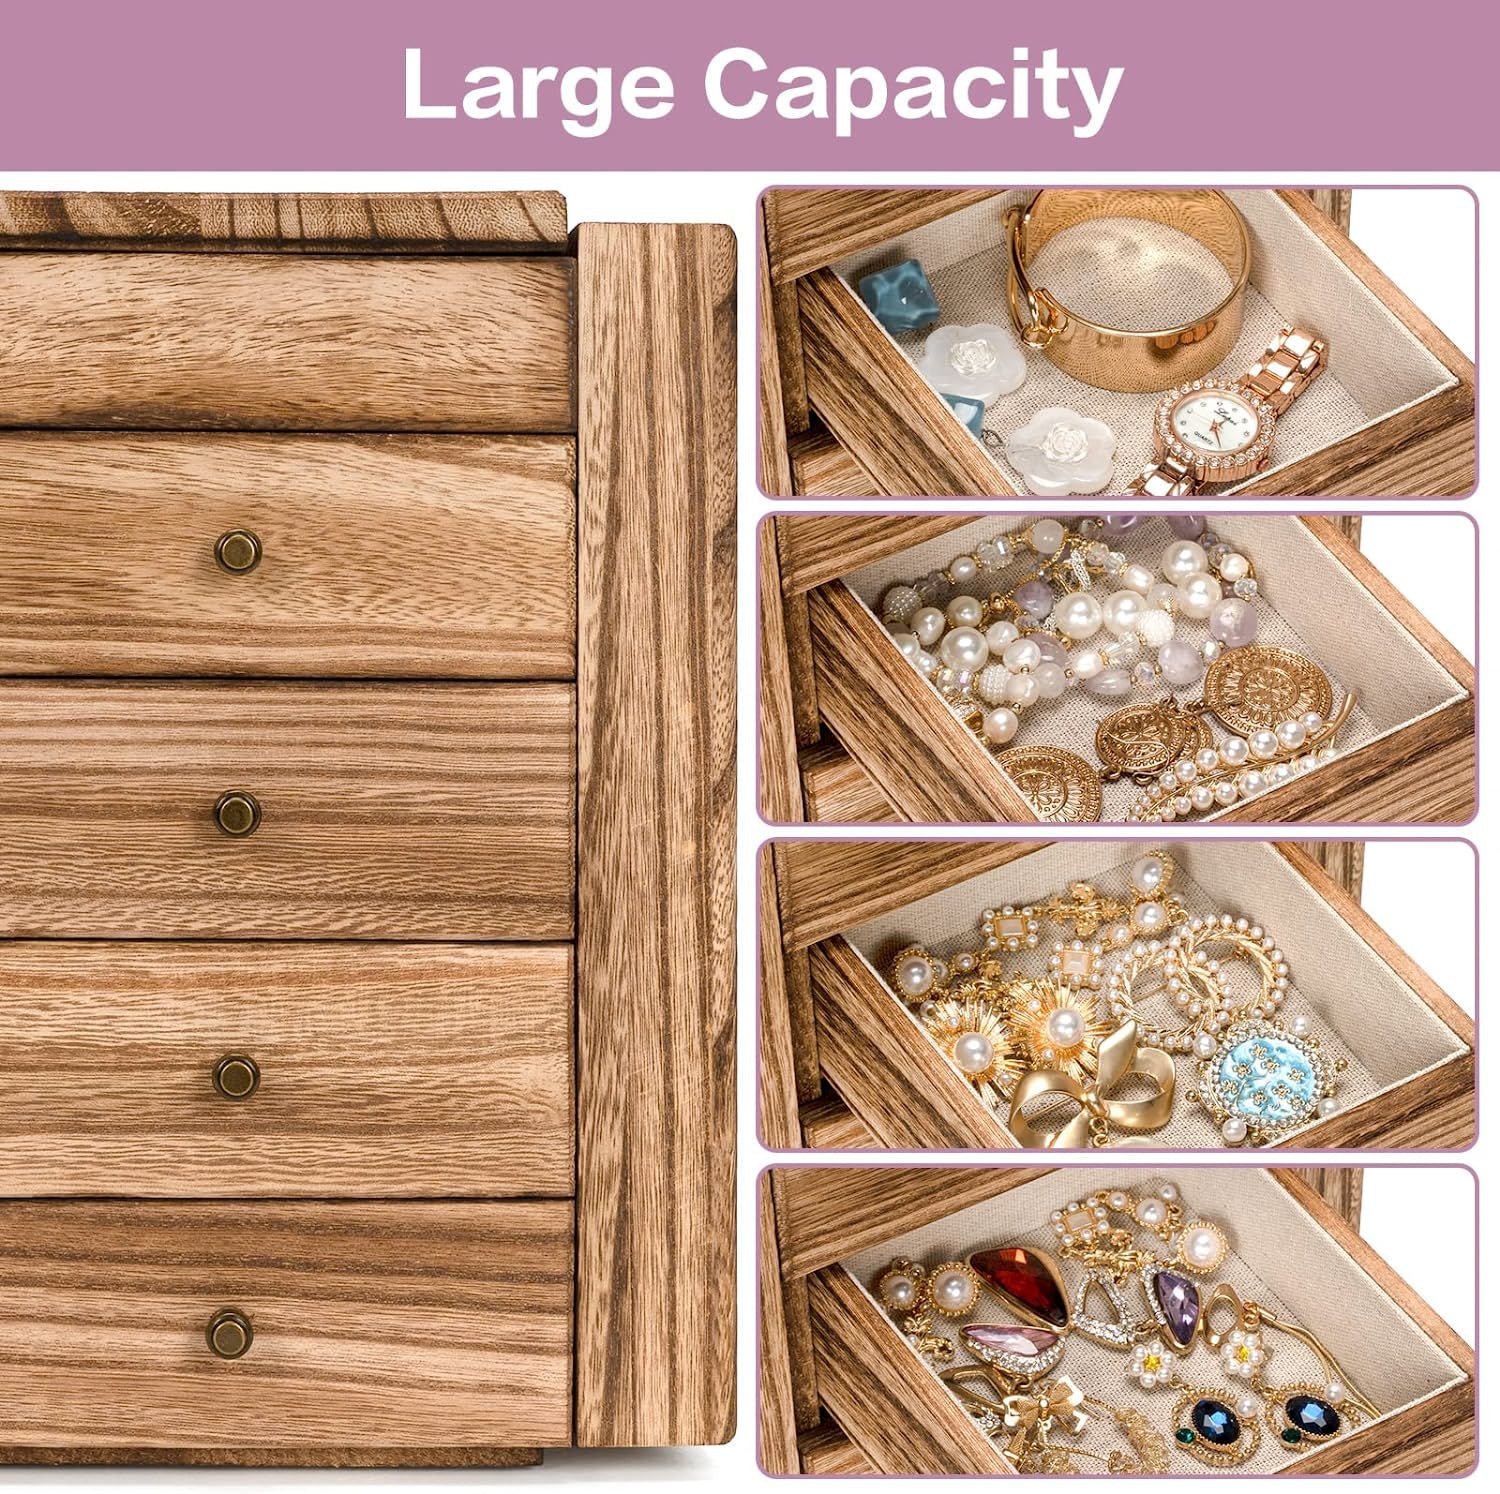 Jewelry Box Wood for Wowen, 5-Layer Large Organizer Box with Mirror & 4 Drawers for Rings, Earrings, Necklaces, Vintage Style Torched Wood